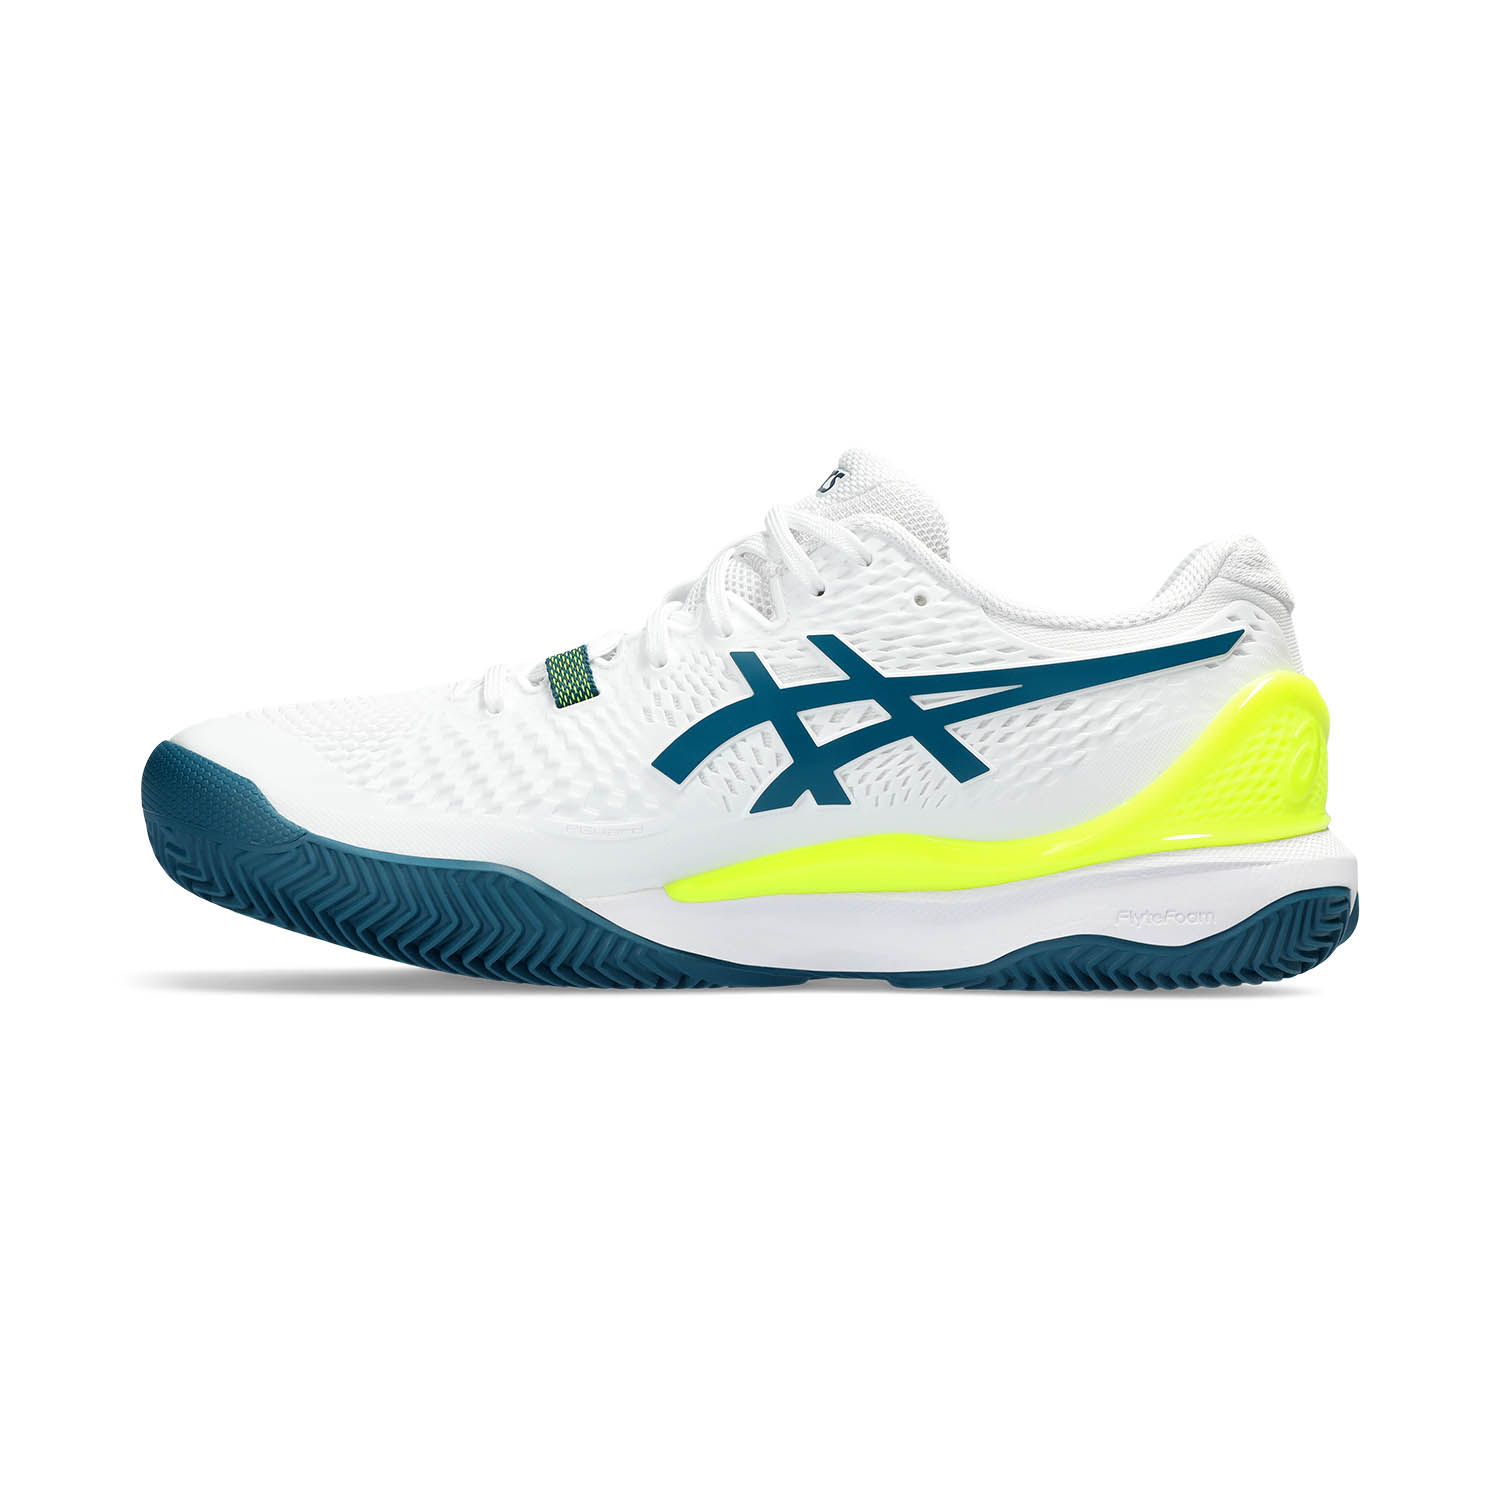 Asics Gel Resolution 9 Clay - White/Restful Teal